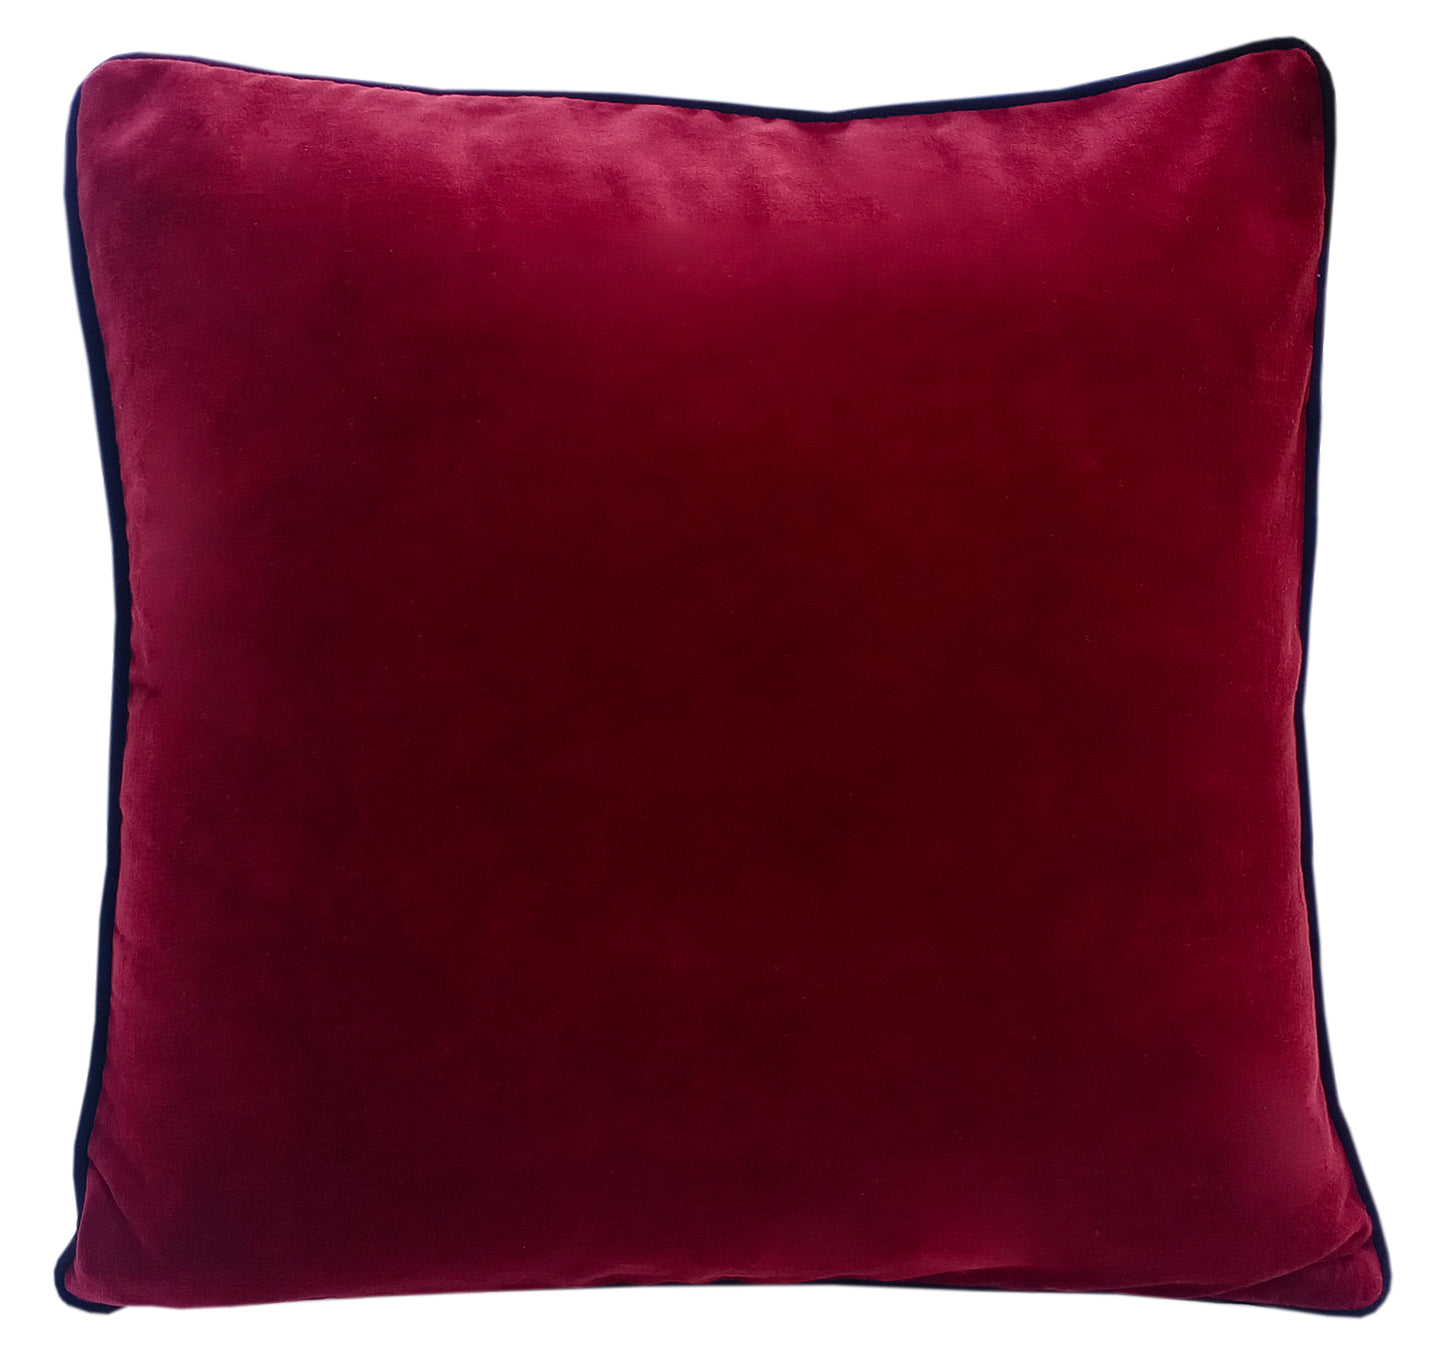 Maroon Velvet Cushion Cover with piping - The Teal Thread